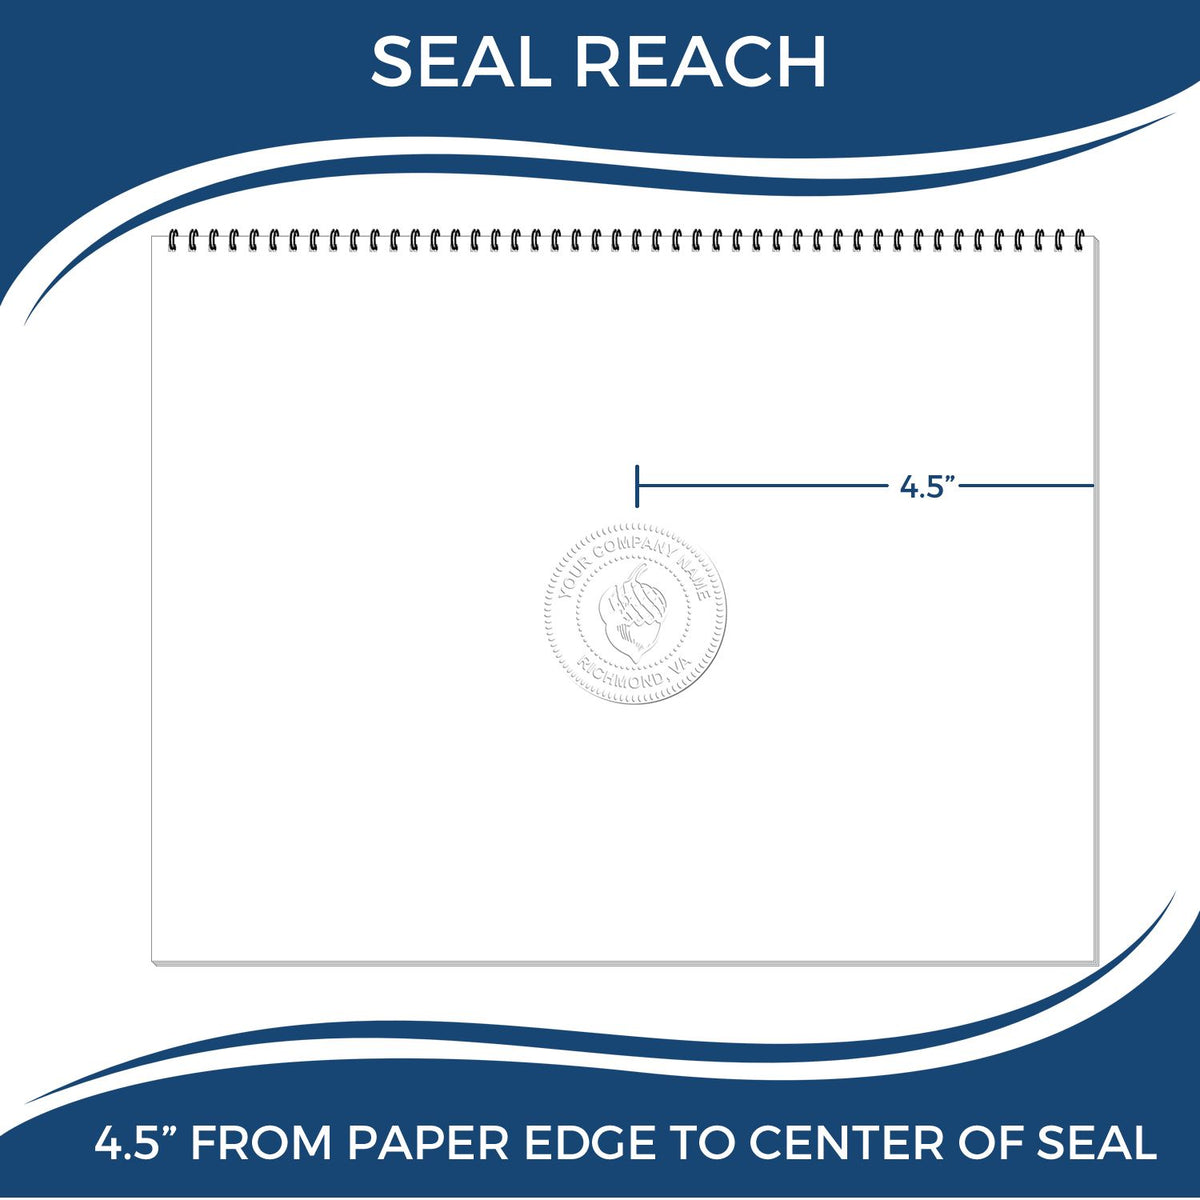 An infographic showing the seal reach which is represented by a ruler and a miniature seal image of the State of Kentucky Extended Long Reach Geologist Seal